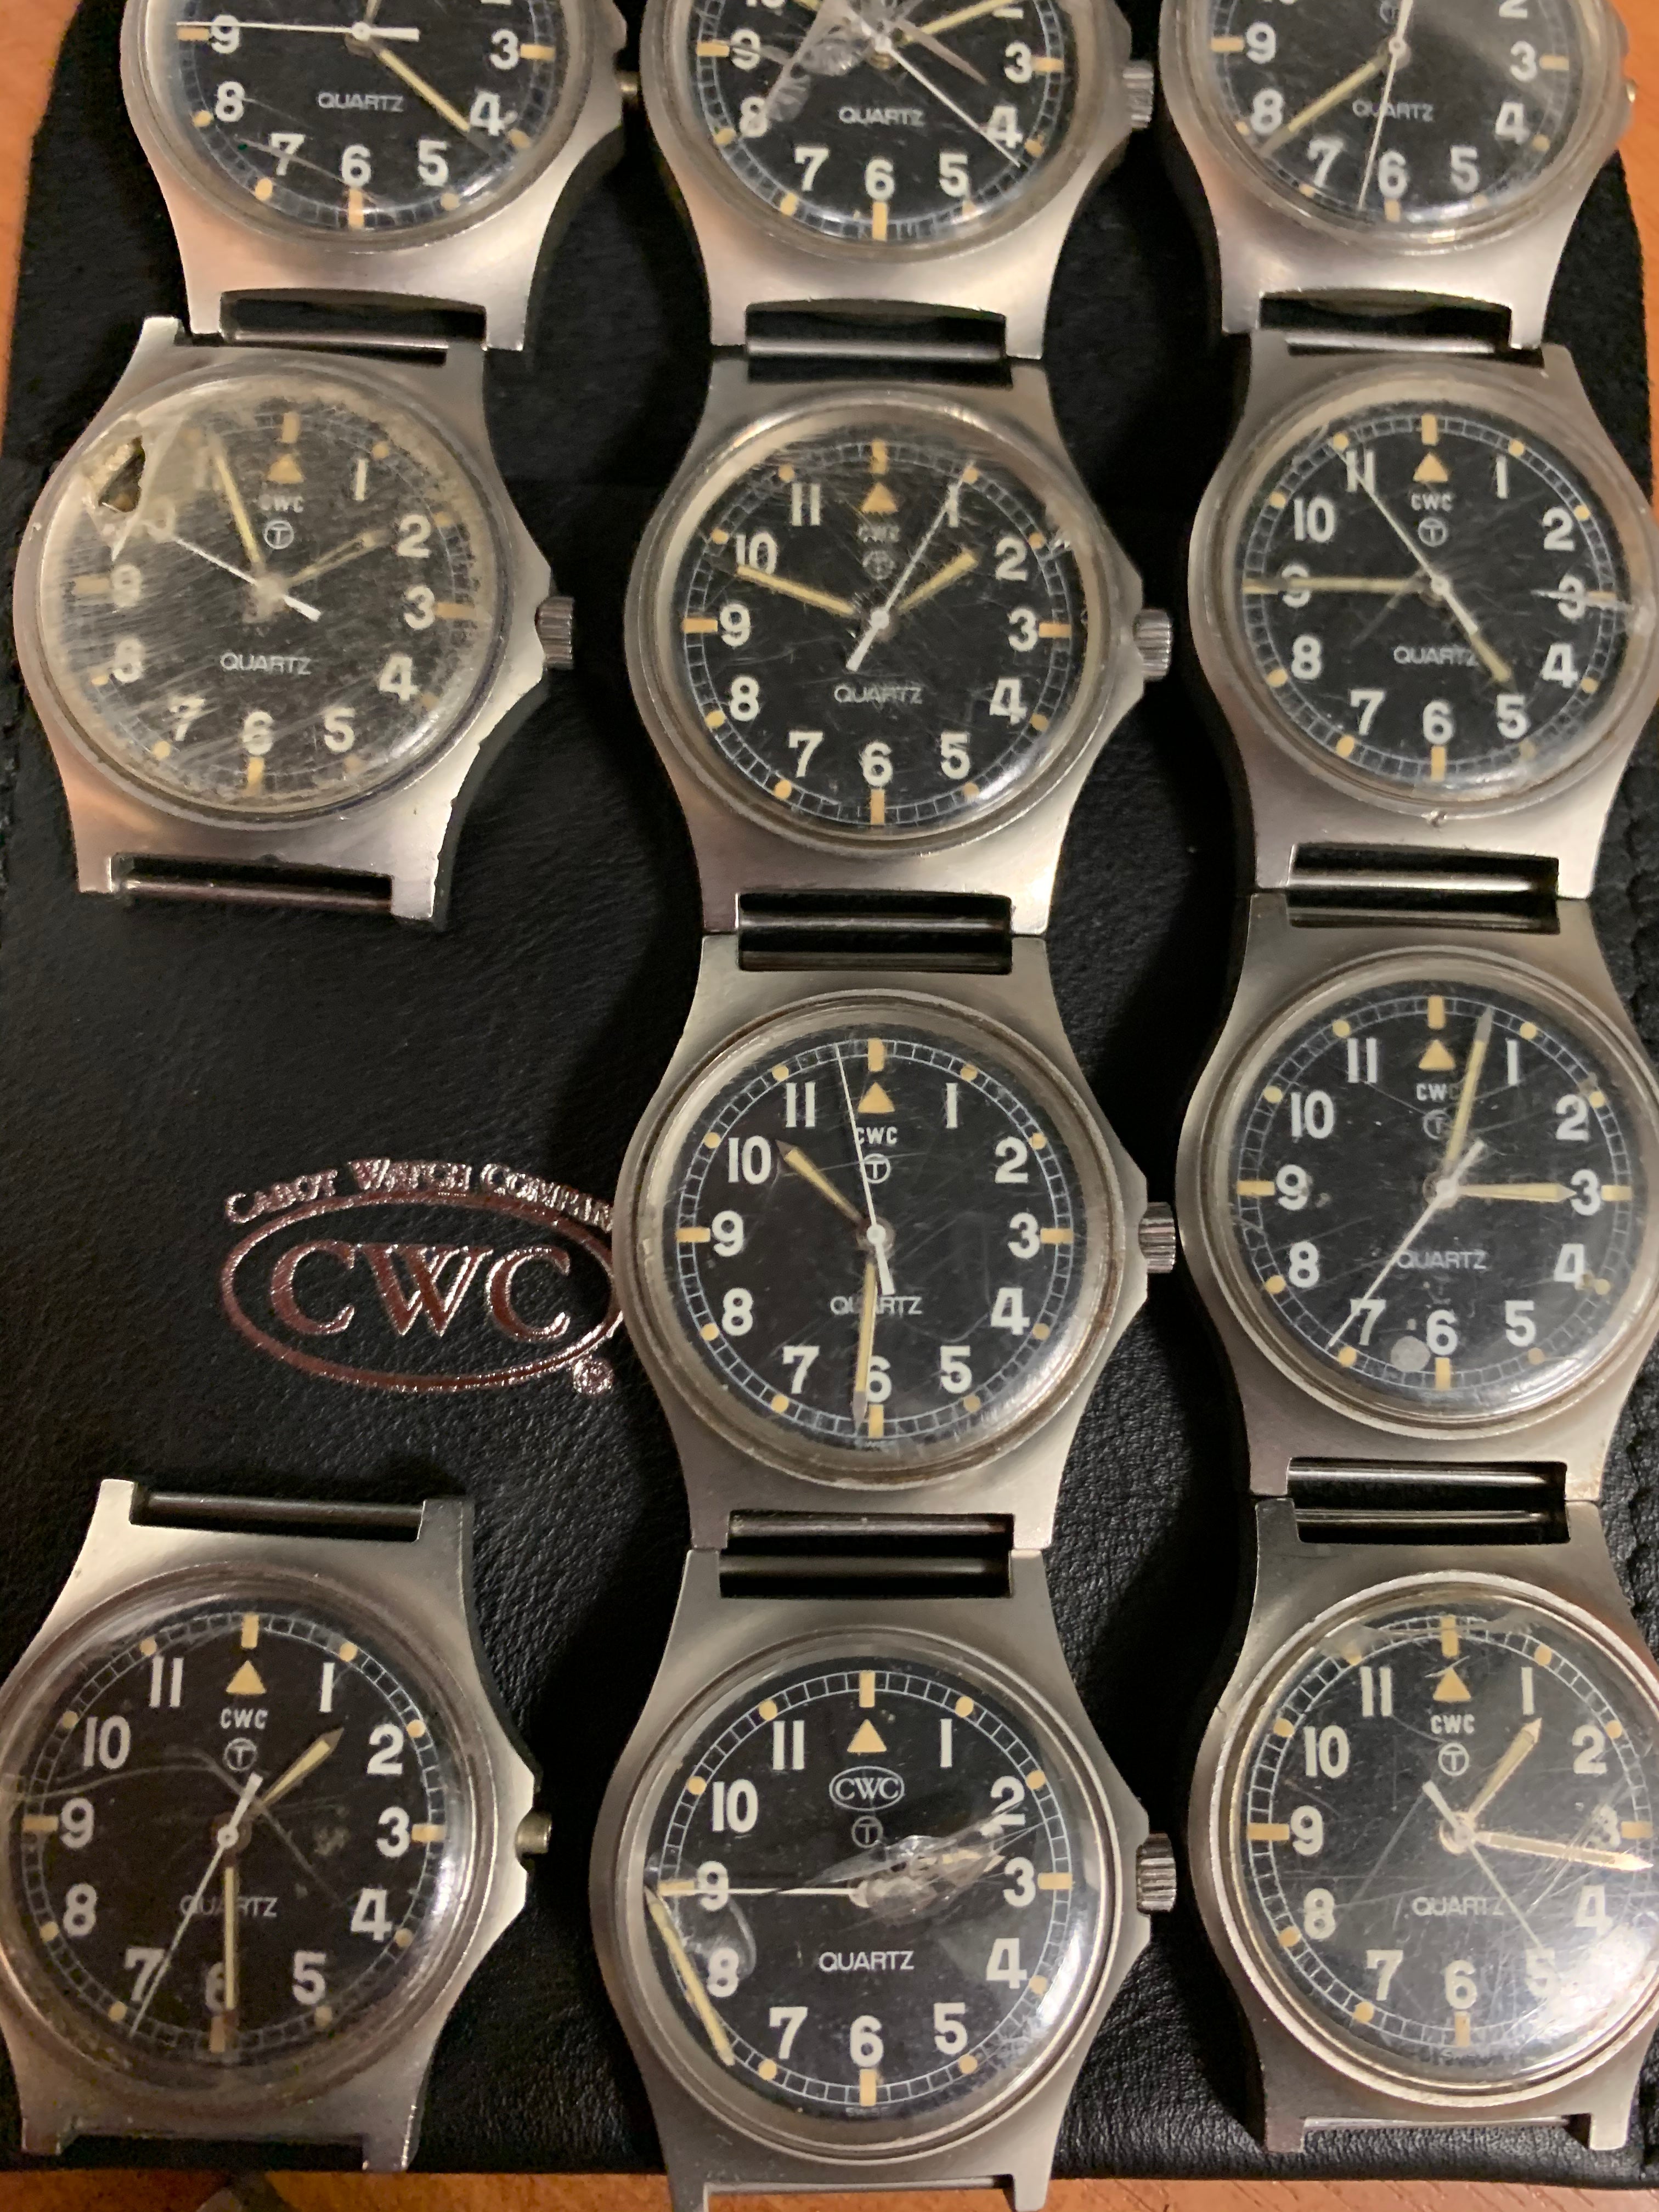 WE ARE INTERESTED IN PURCHASING YOUR OLD CWC MILITARY WATCH